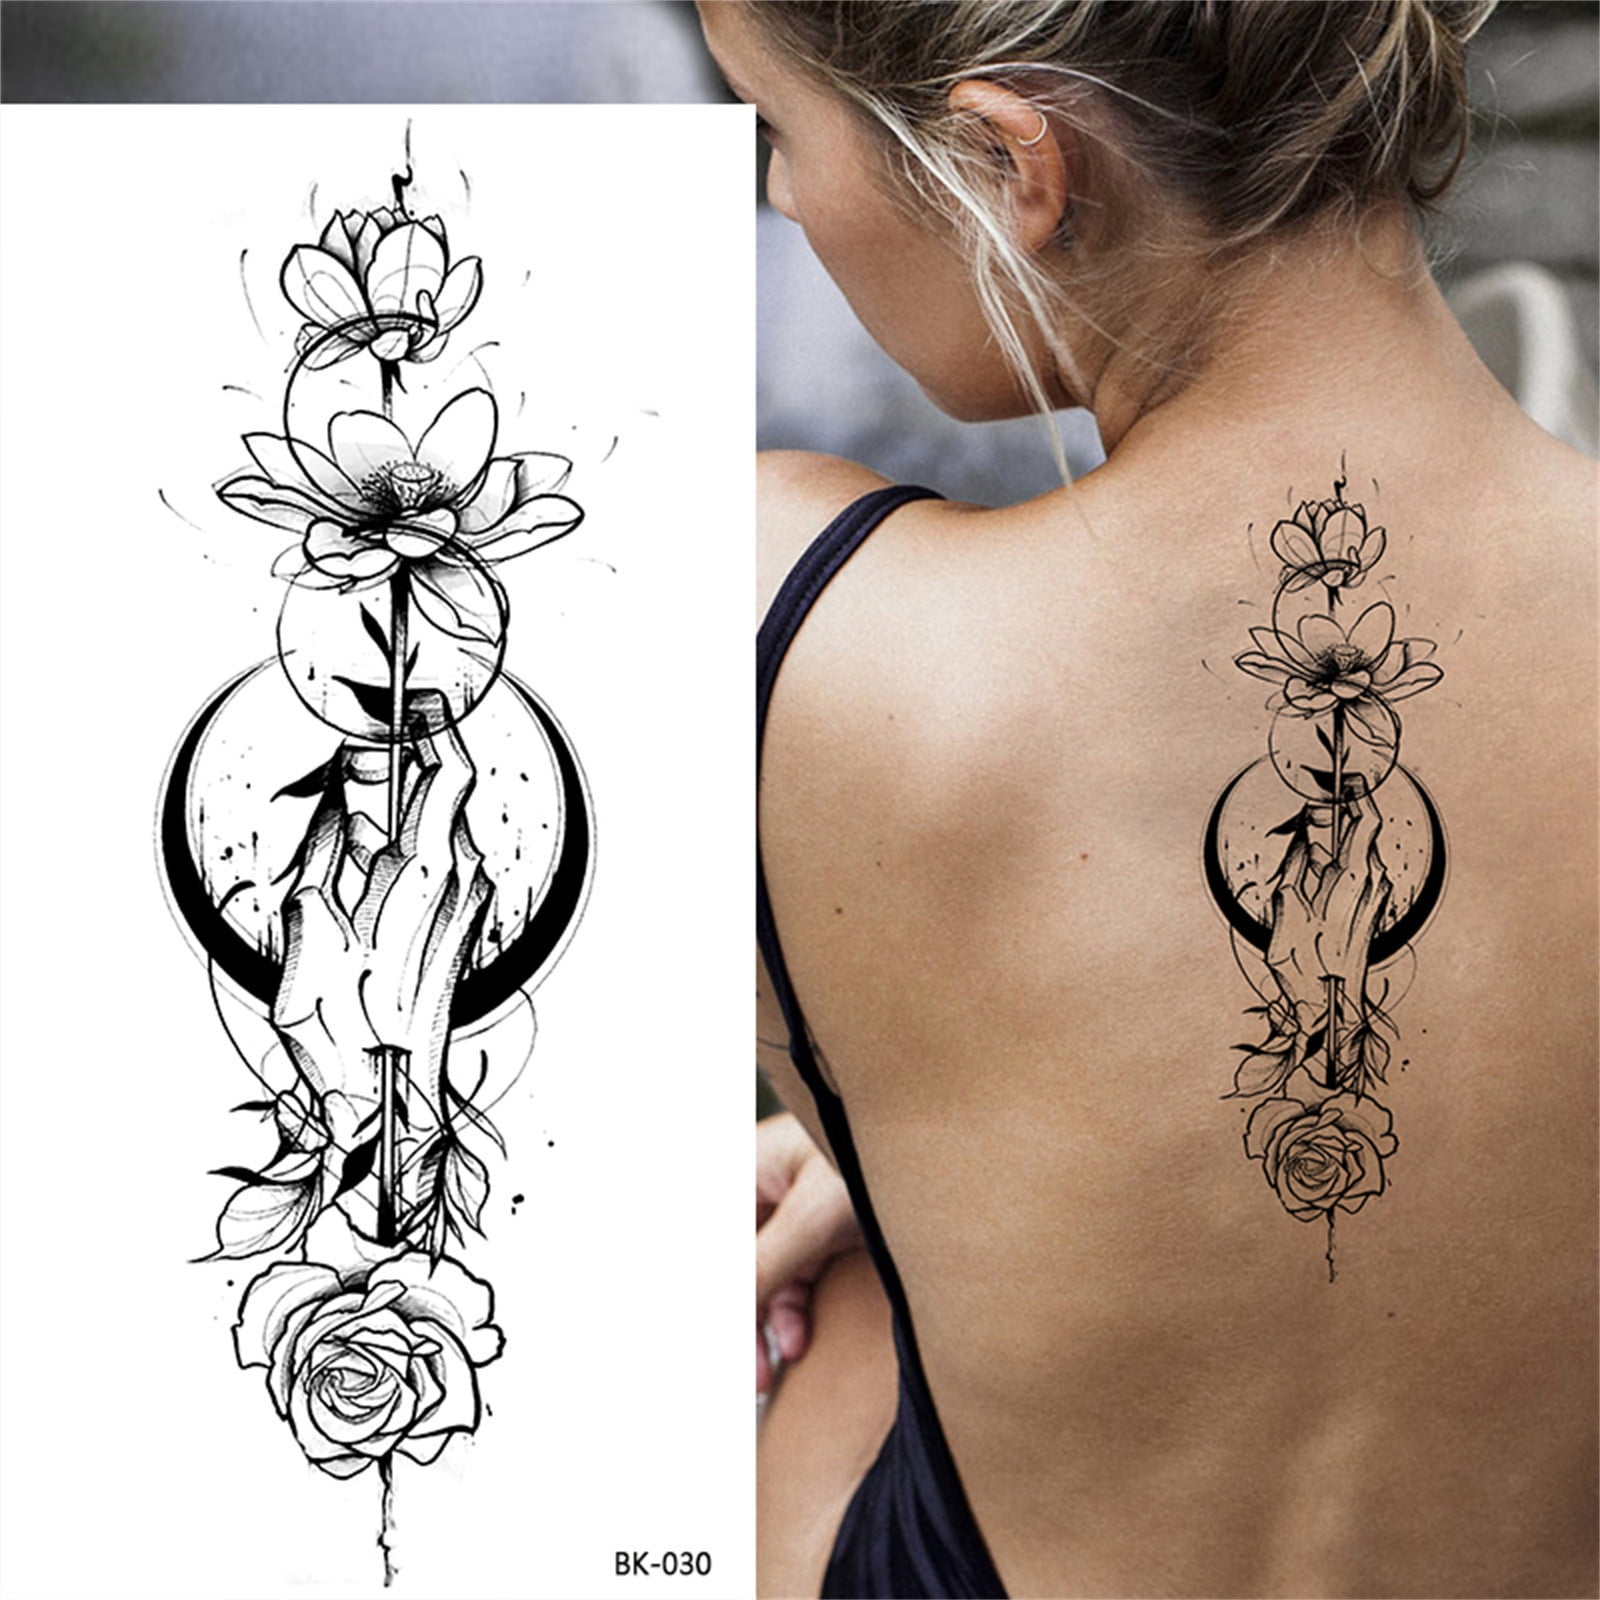 Tattoo Stickers LnjYIGJ Sketch Tattoos Stickers Abstract Stickers Rose  Flowers 